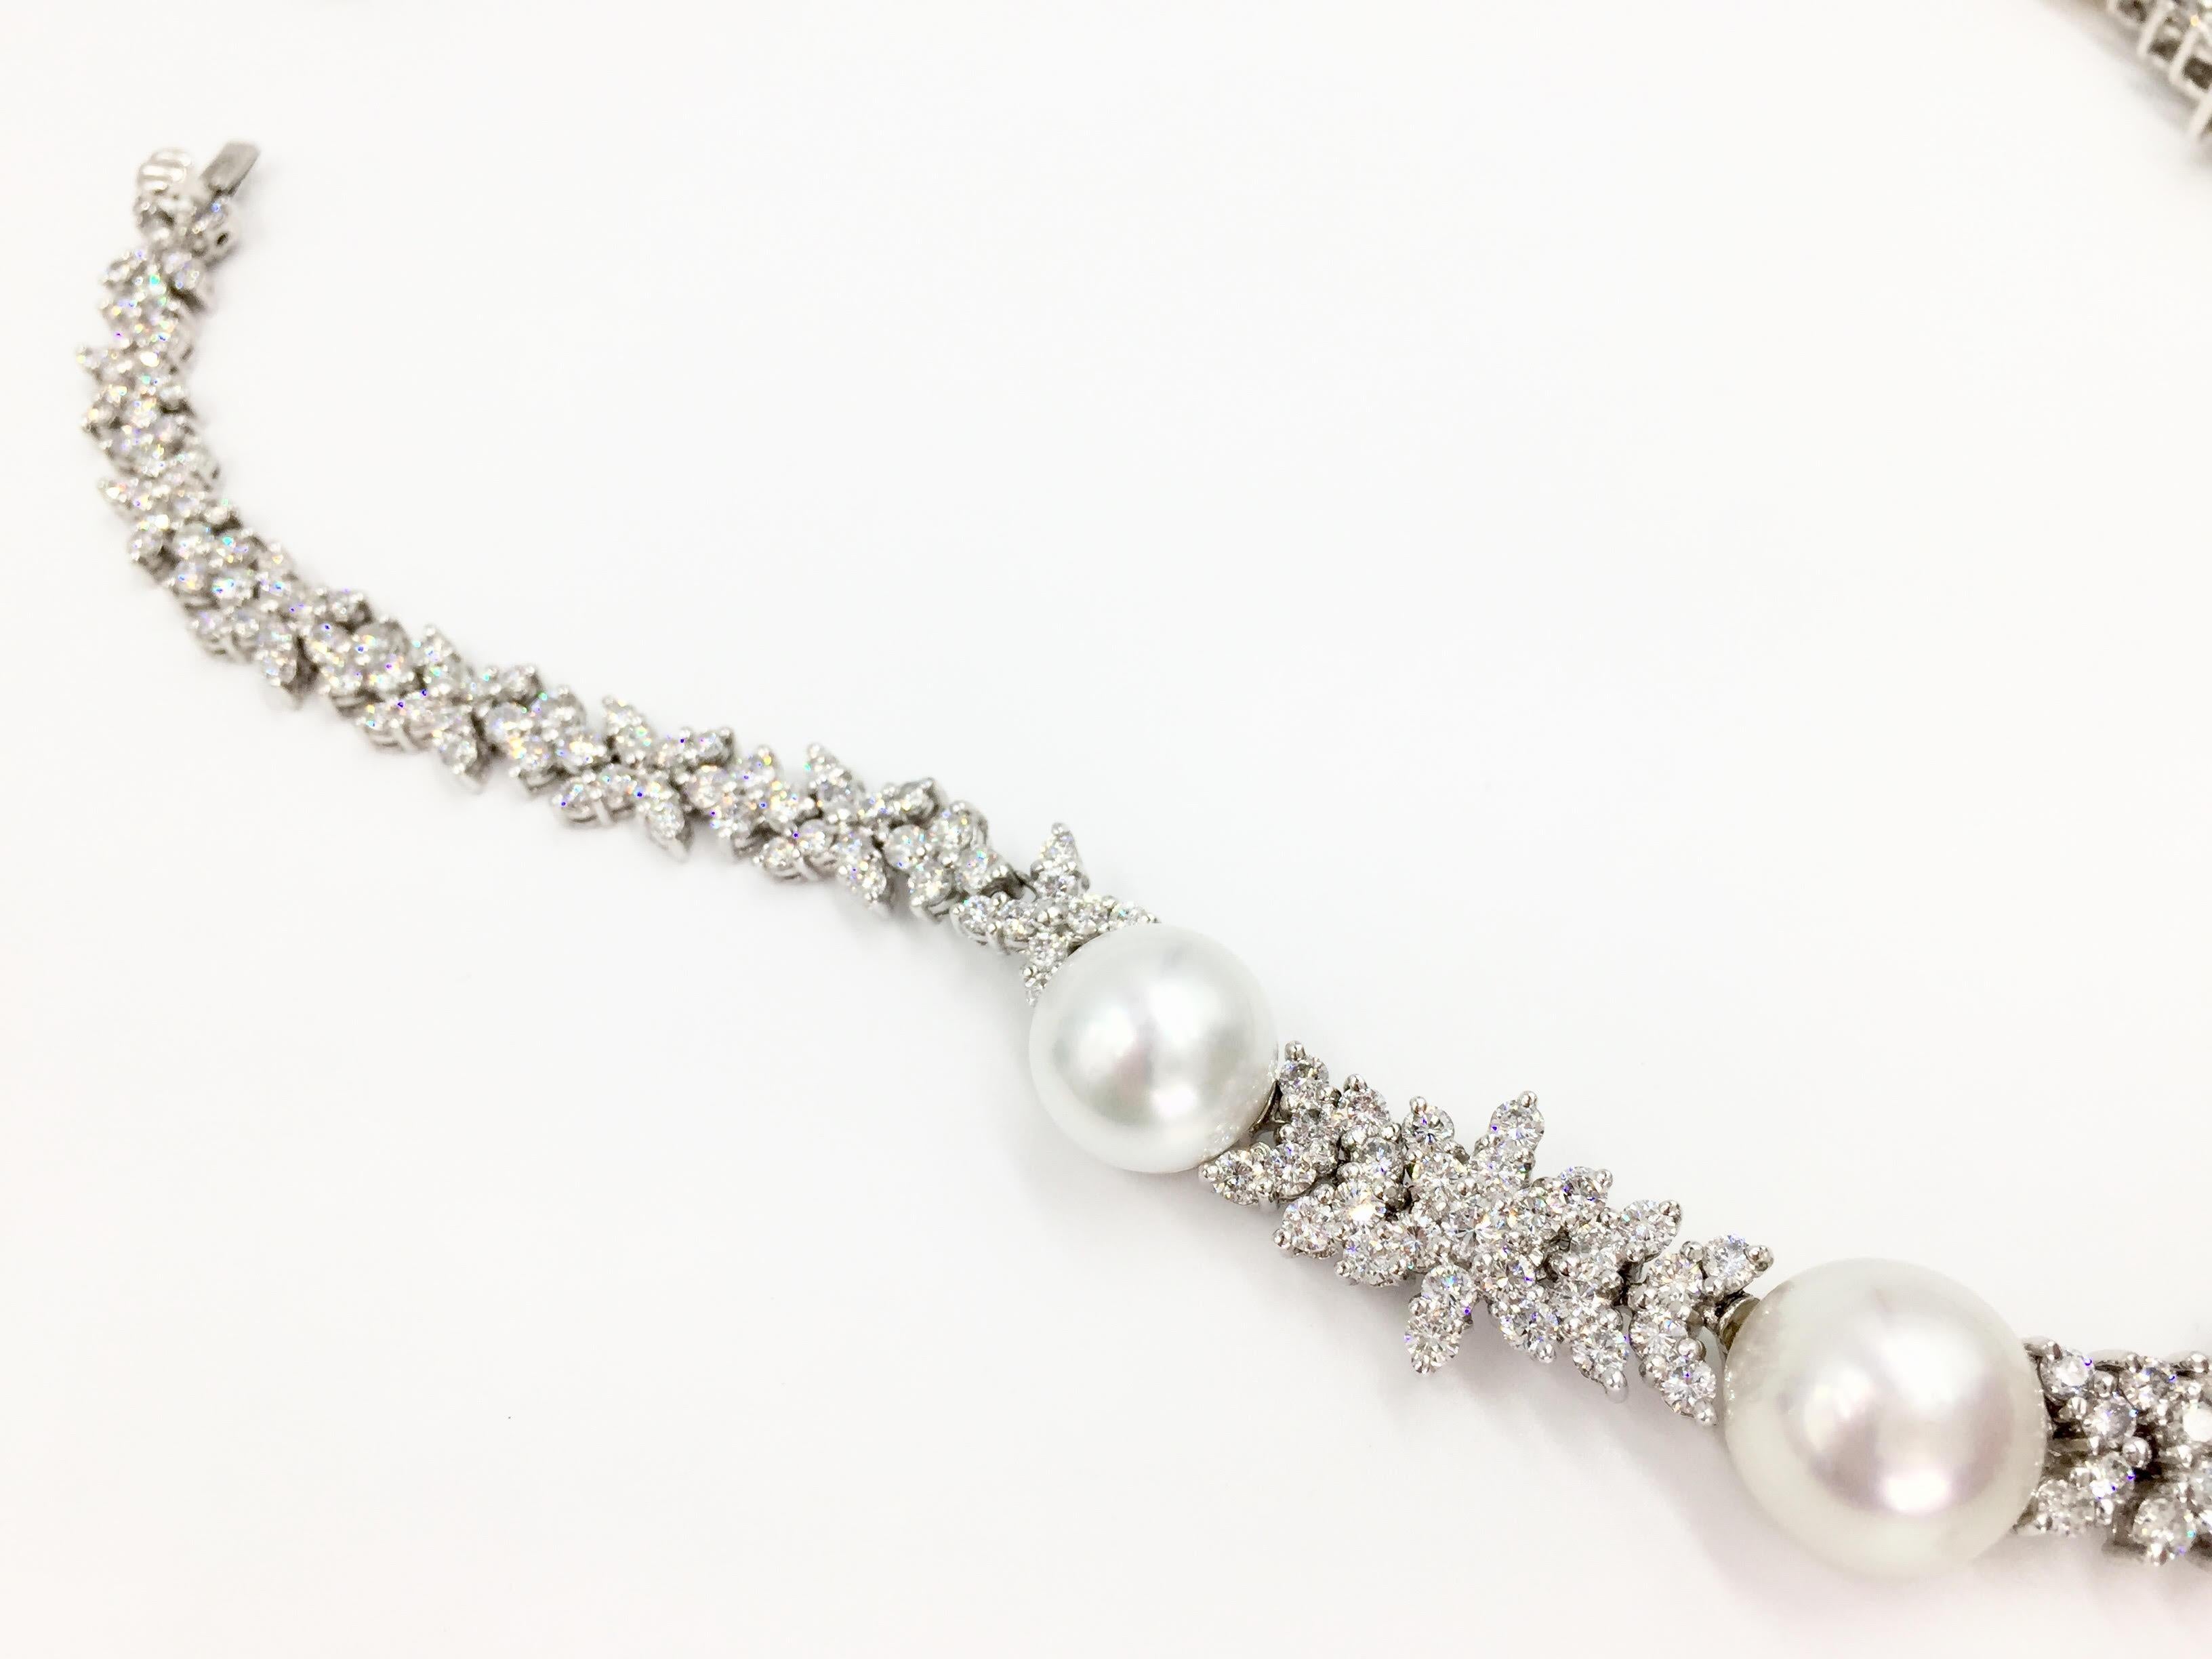 Diamond and South Sea Pearl Platinum Necklace 16.76 Carat Total Weight 1